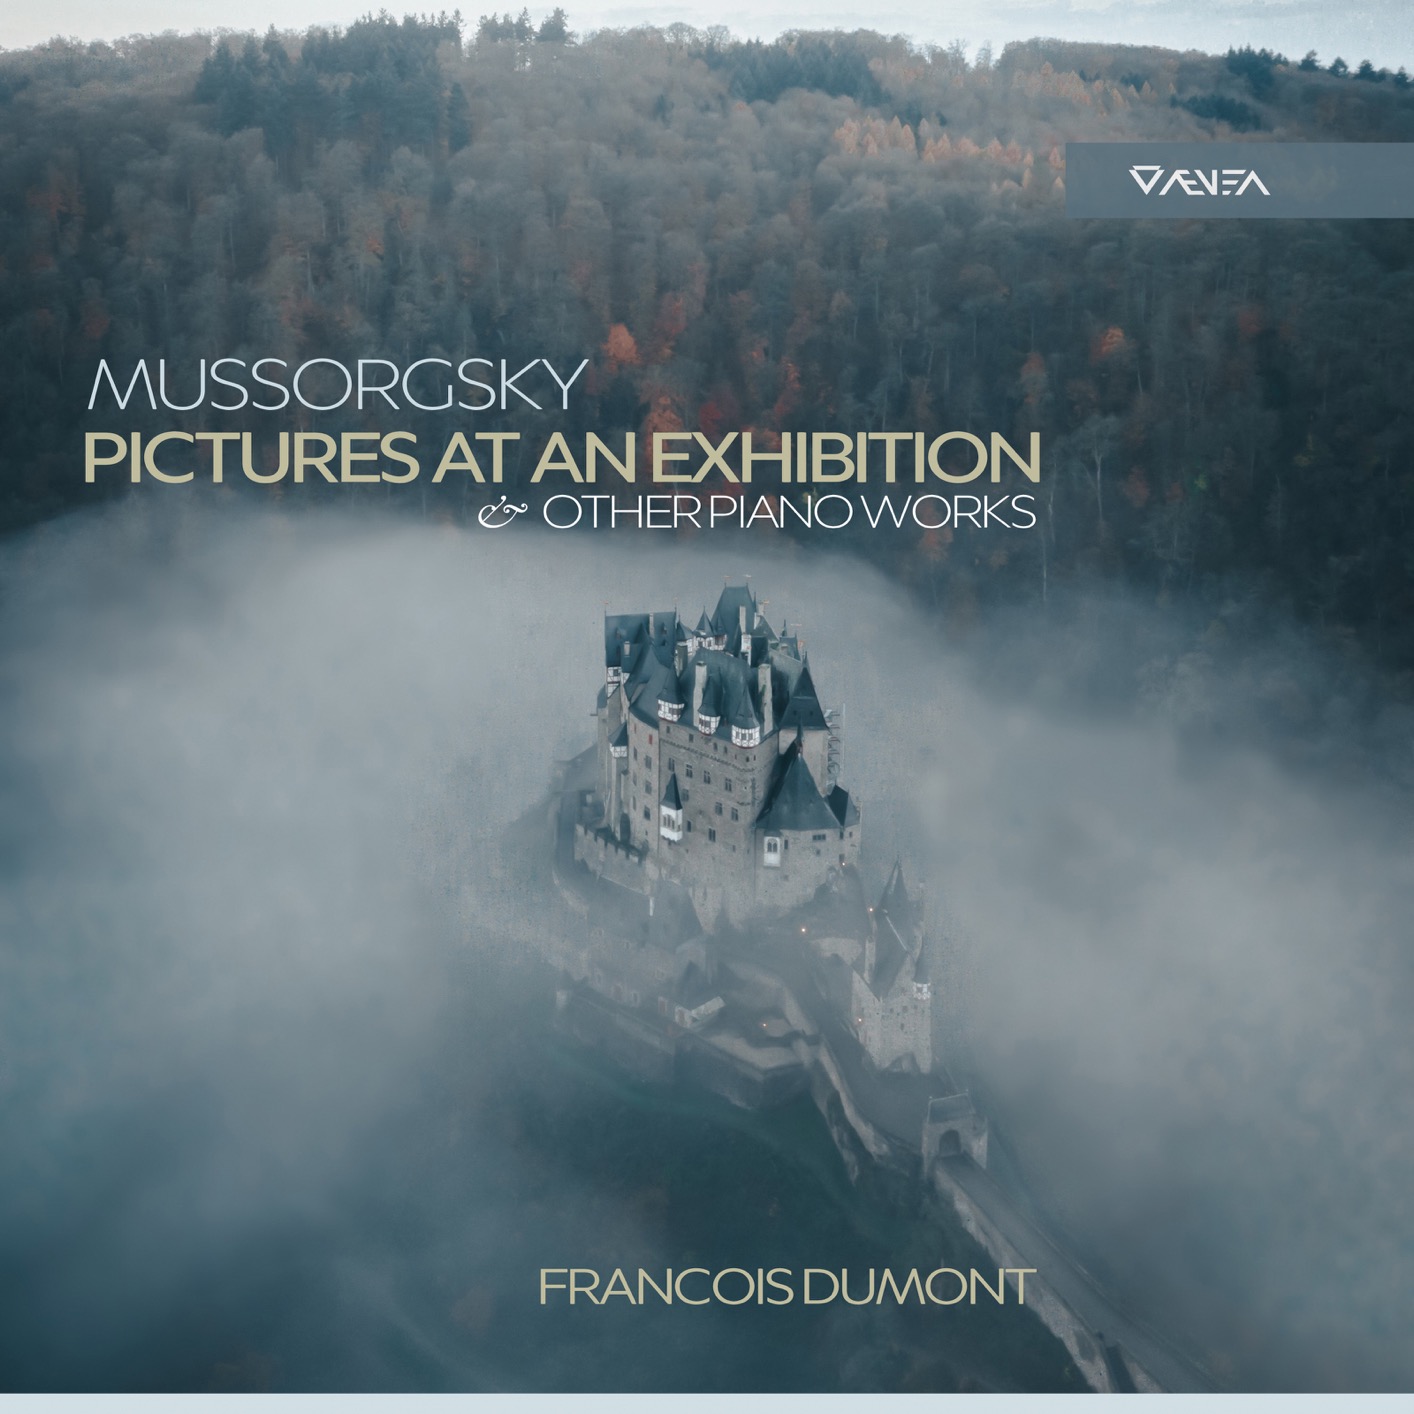 Francois Dumont - Mussorgsky: Pictures at an Exhibition & Other Piano Works (2019) [FLAC 24bit/88,2kHz]